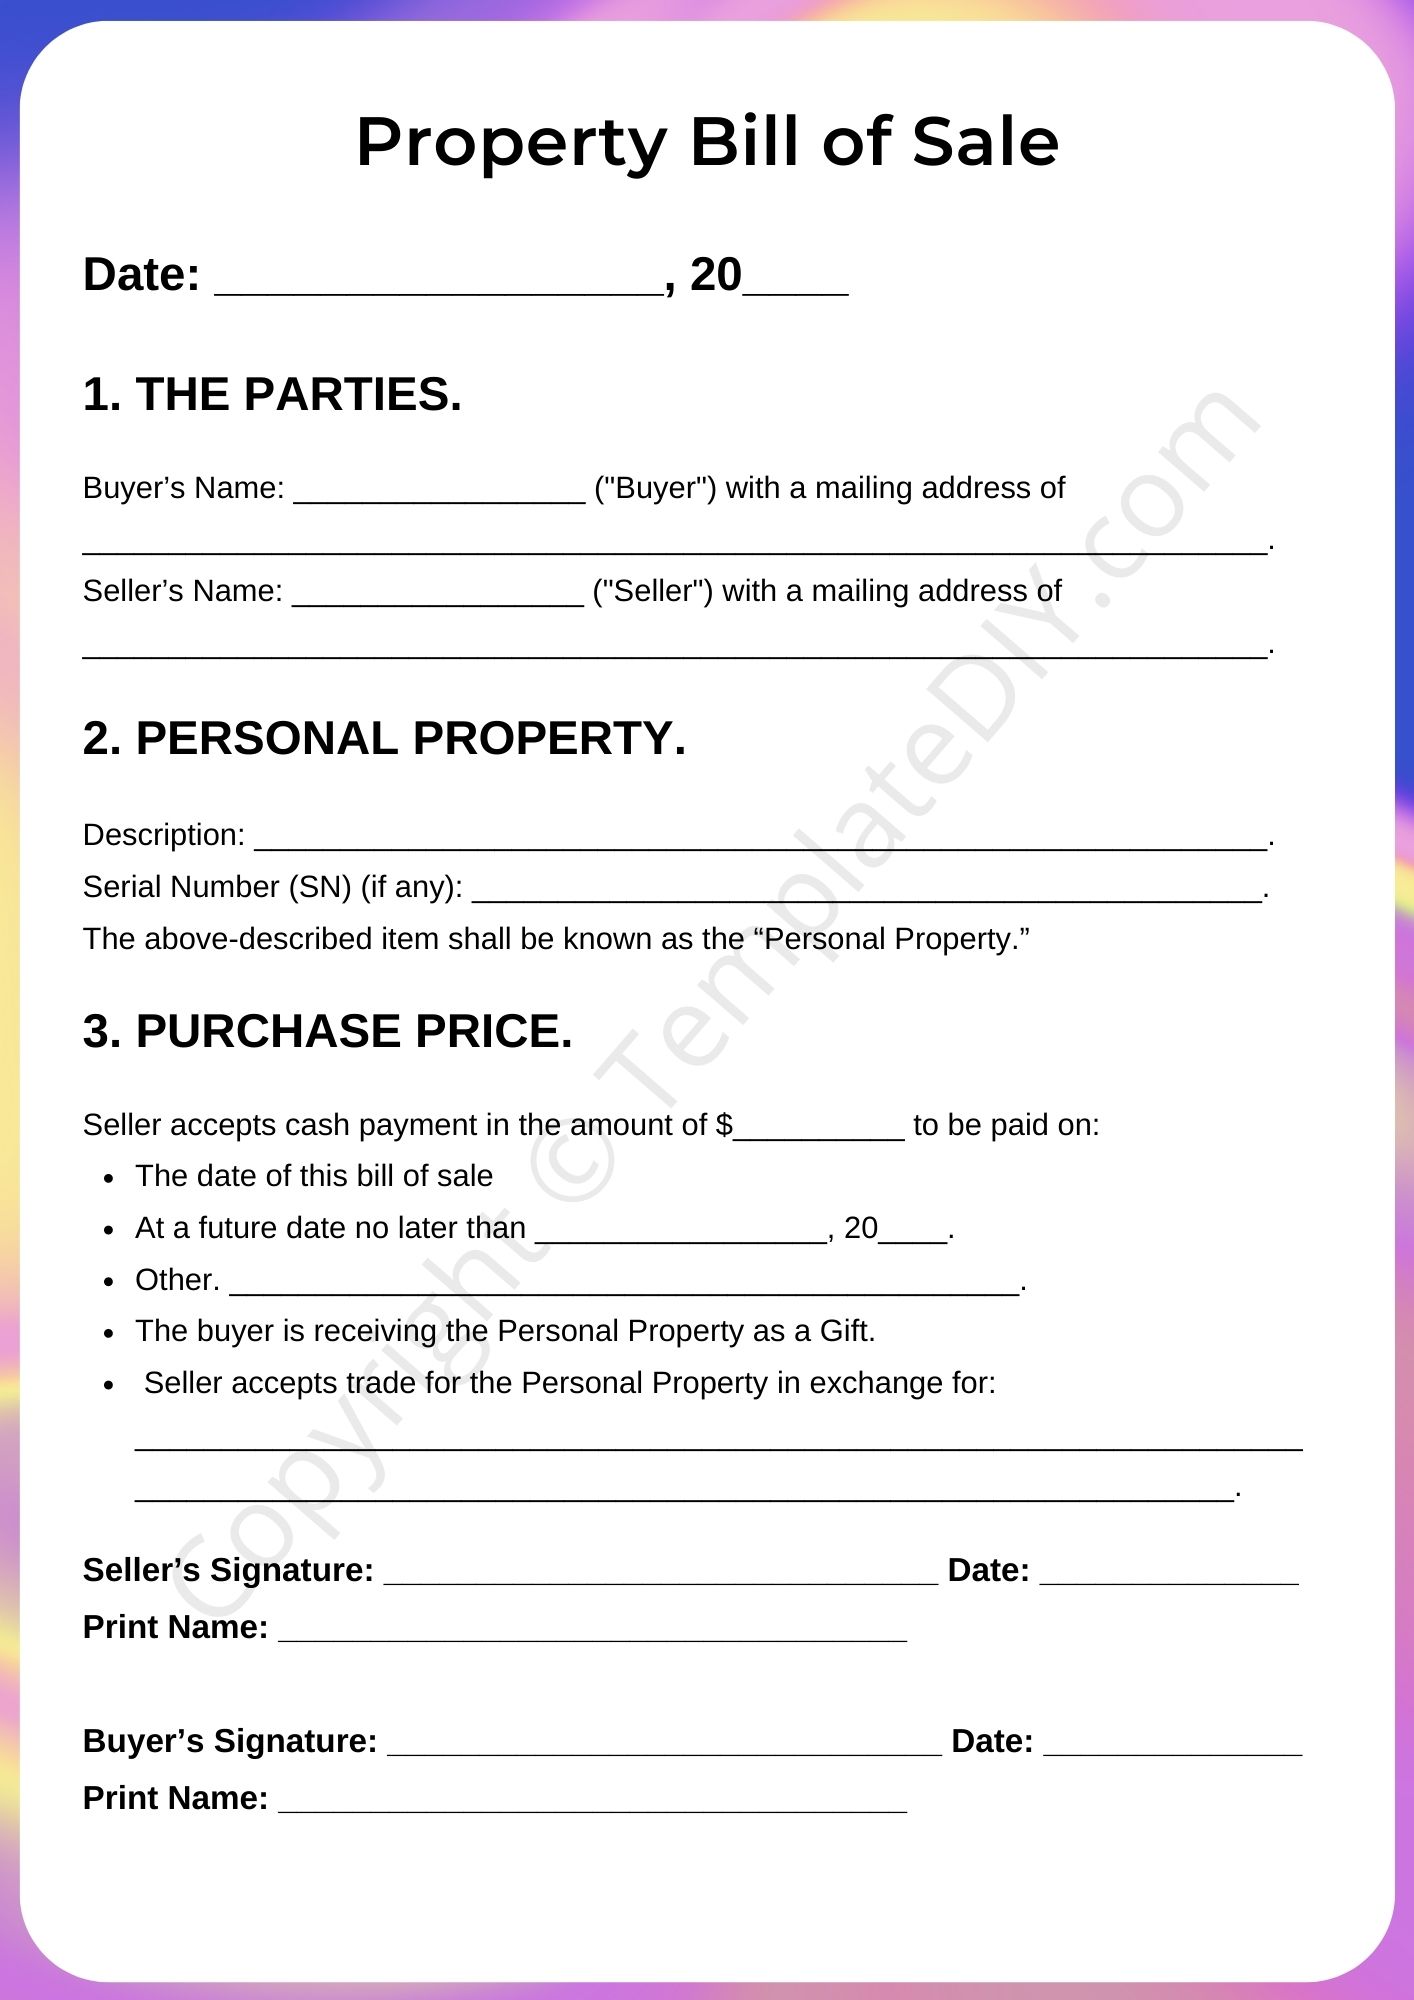 Bill of Sale for Property